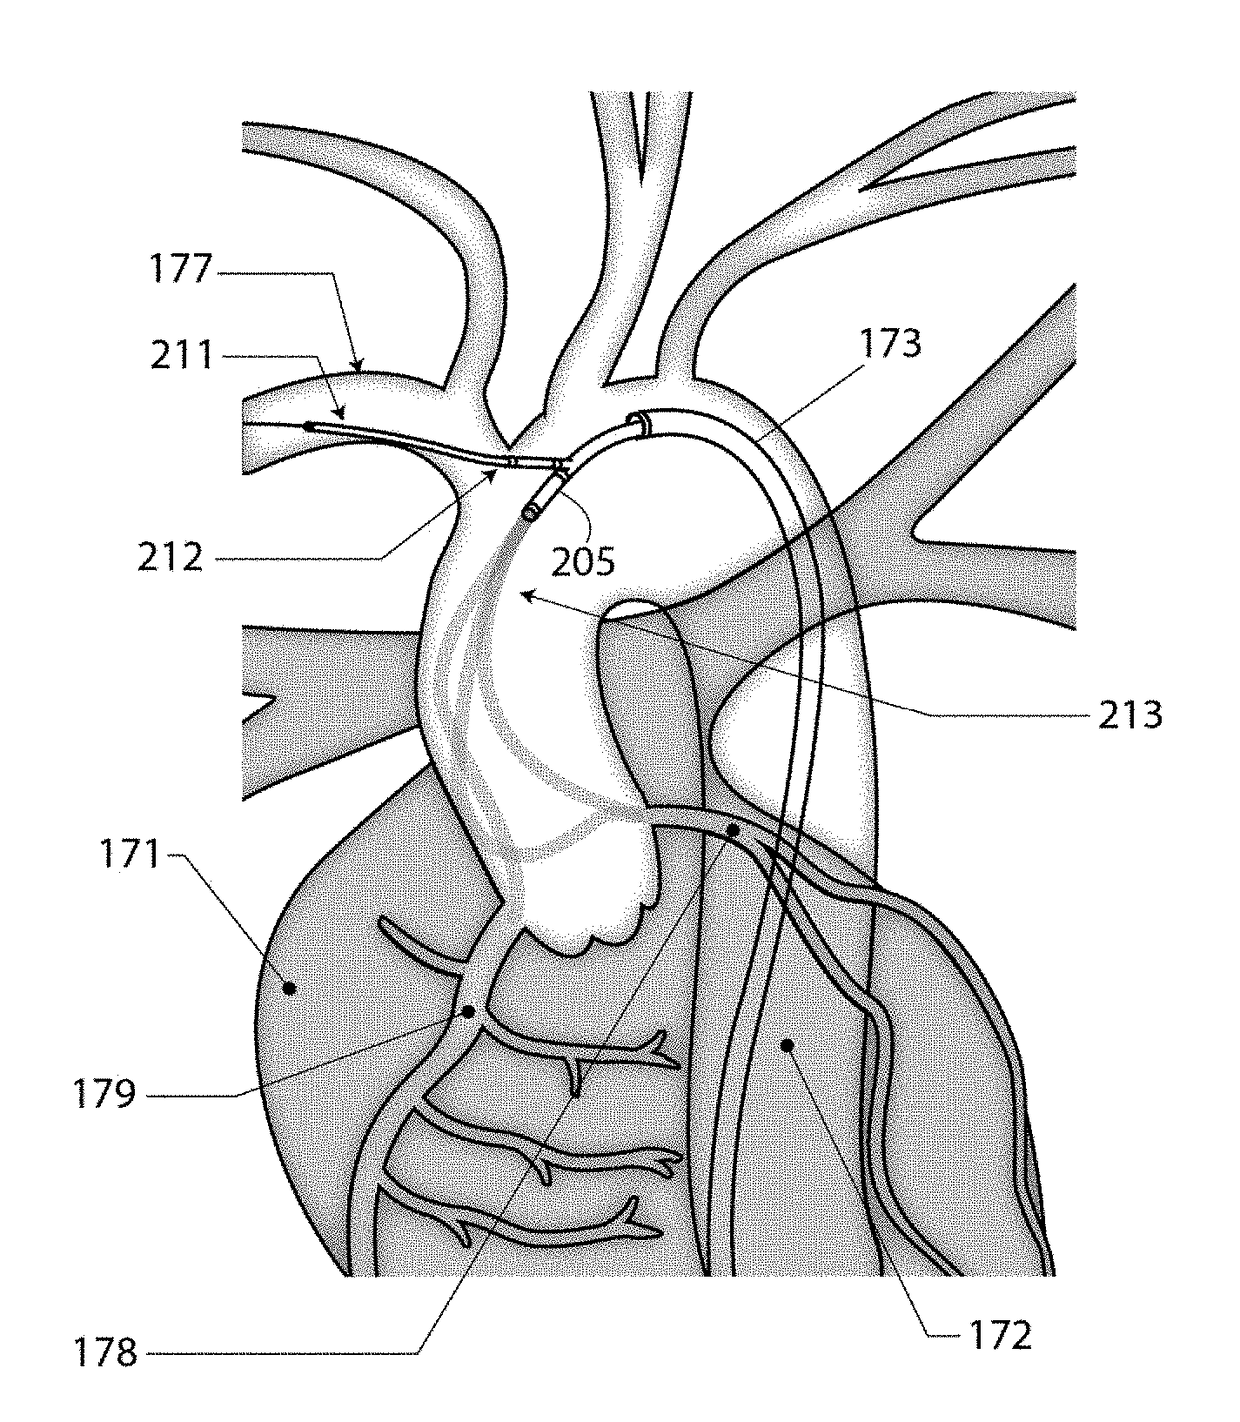 Bifurcated "y" anchor support for coronary interventions